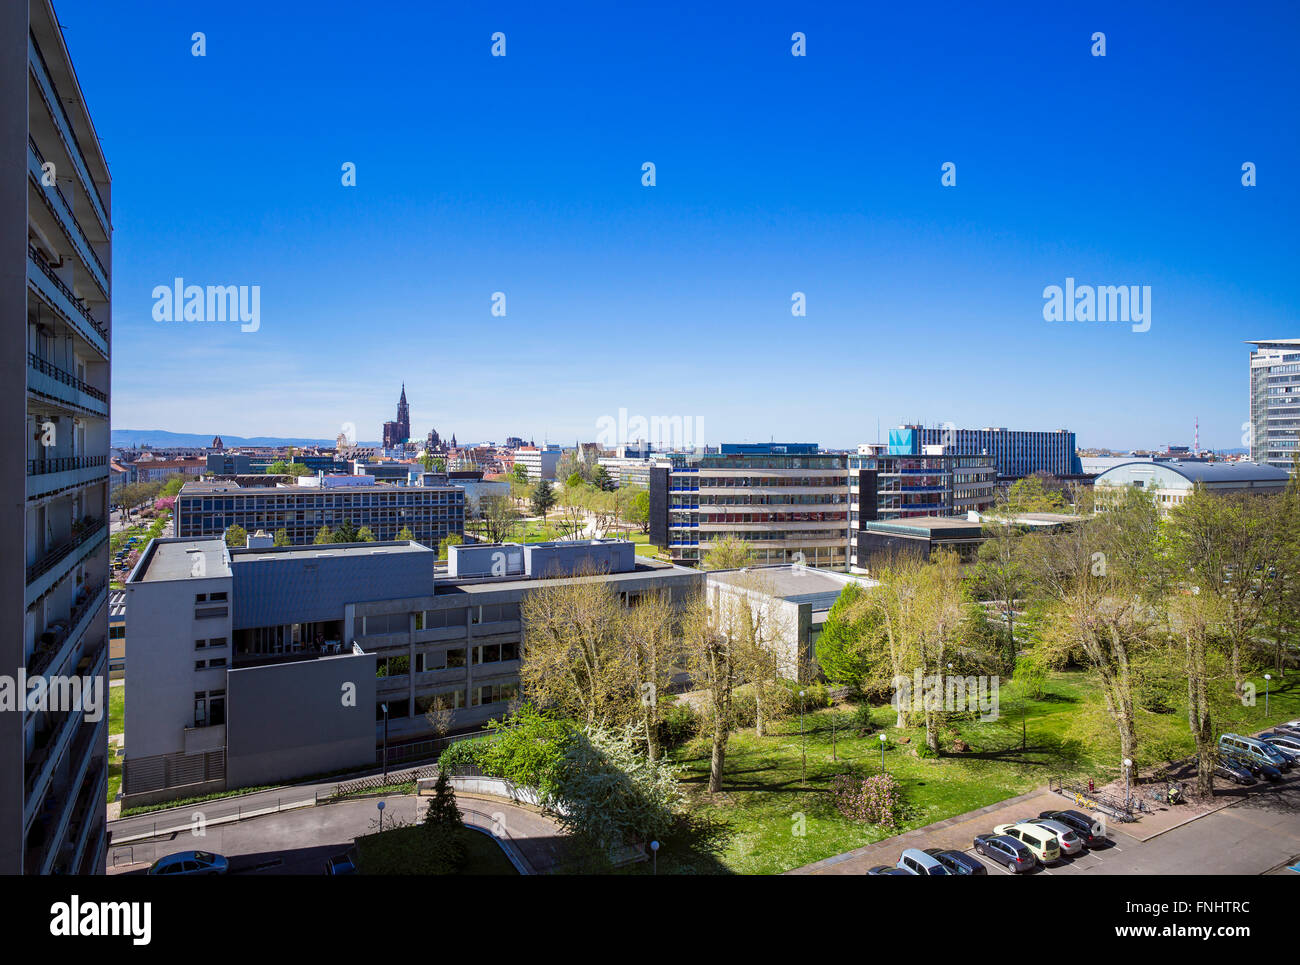 Overview of University campus, 'Esplanade' district, Strasbourg, Alsace, France, Europe Stock Photo